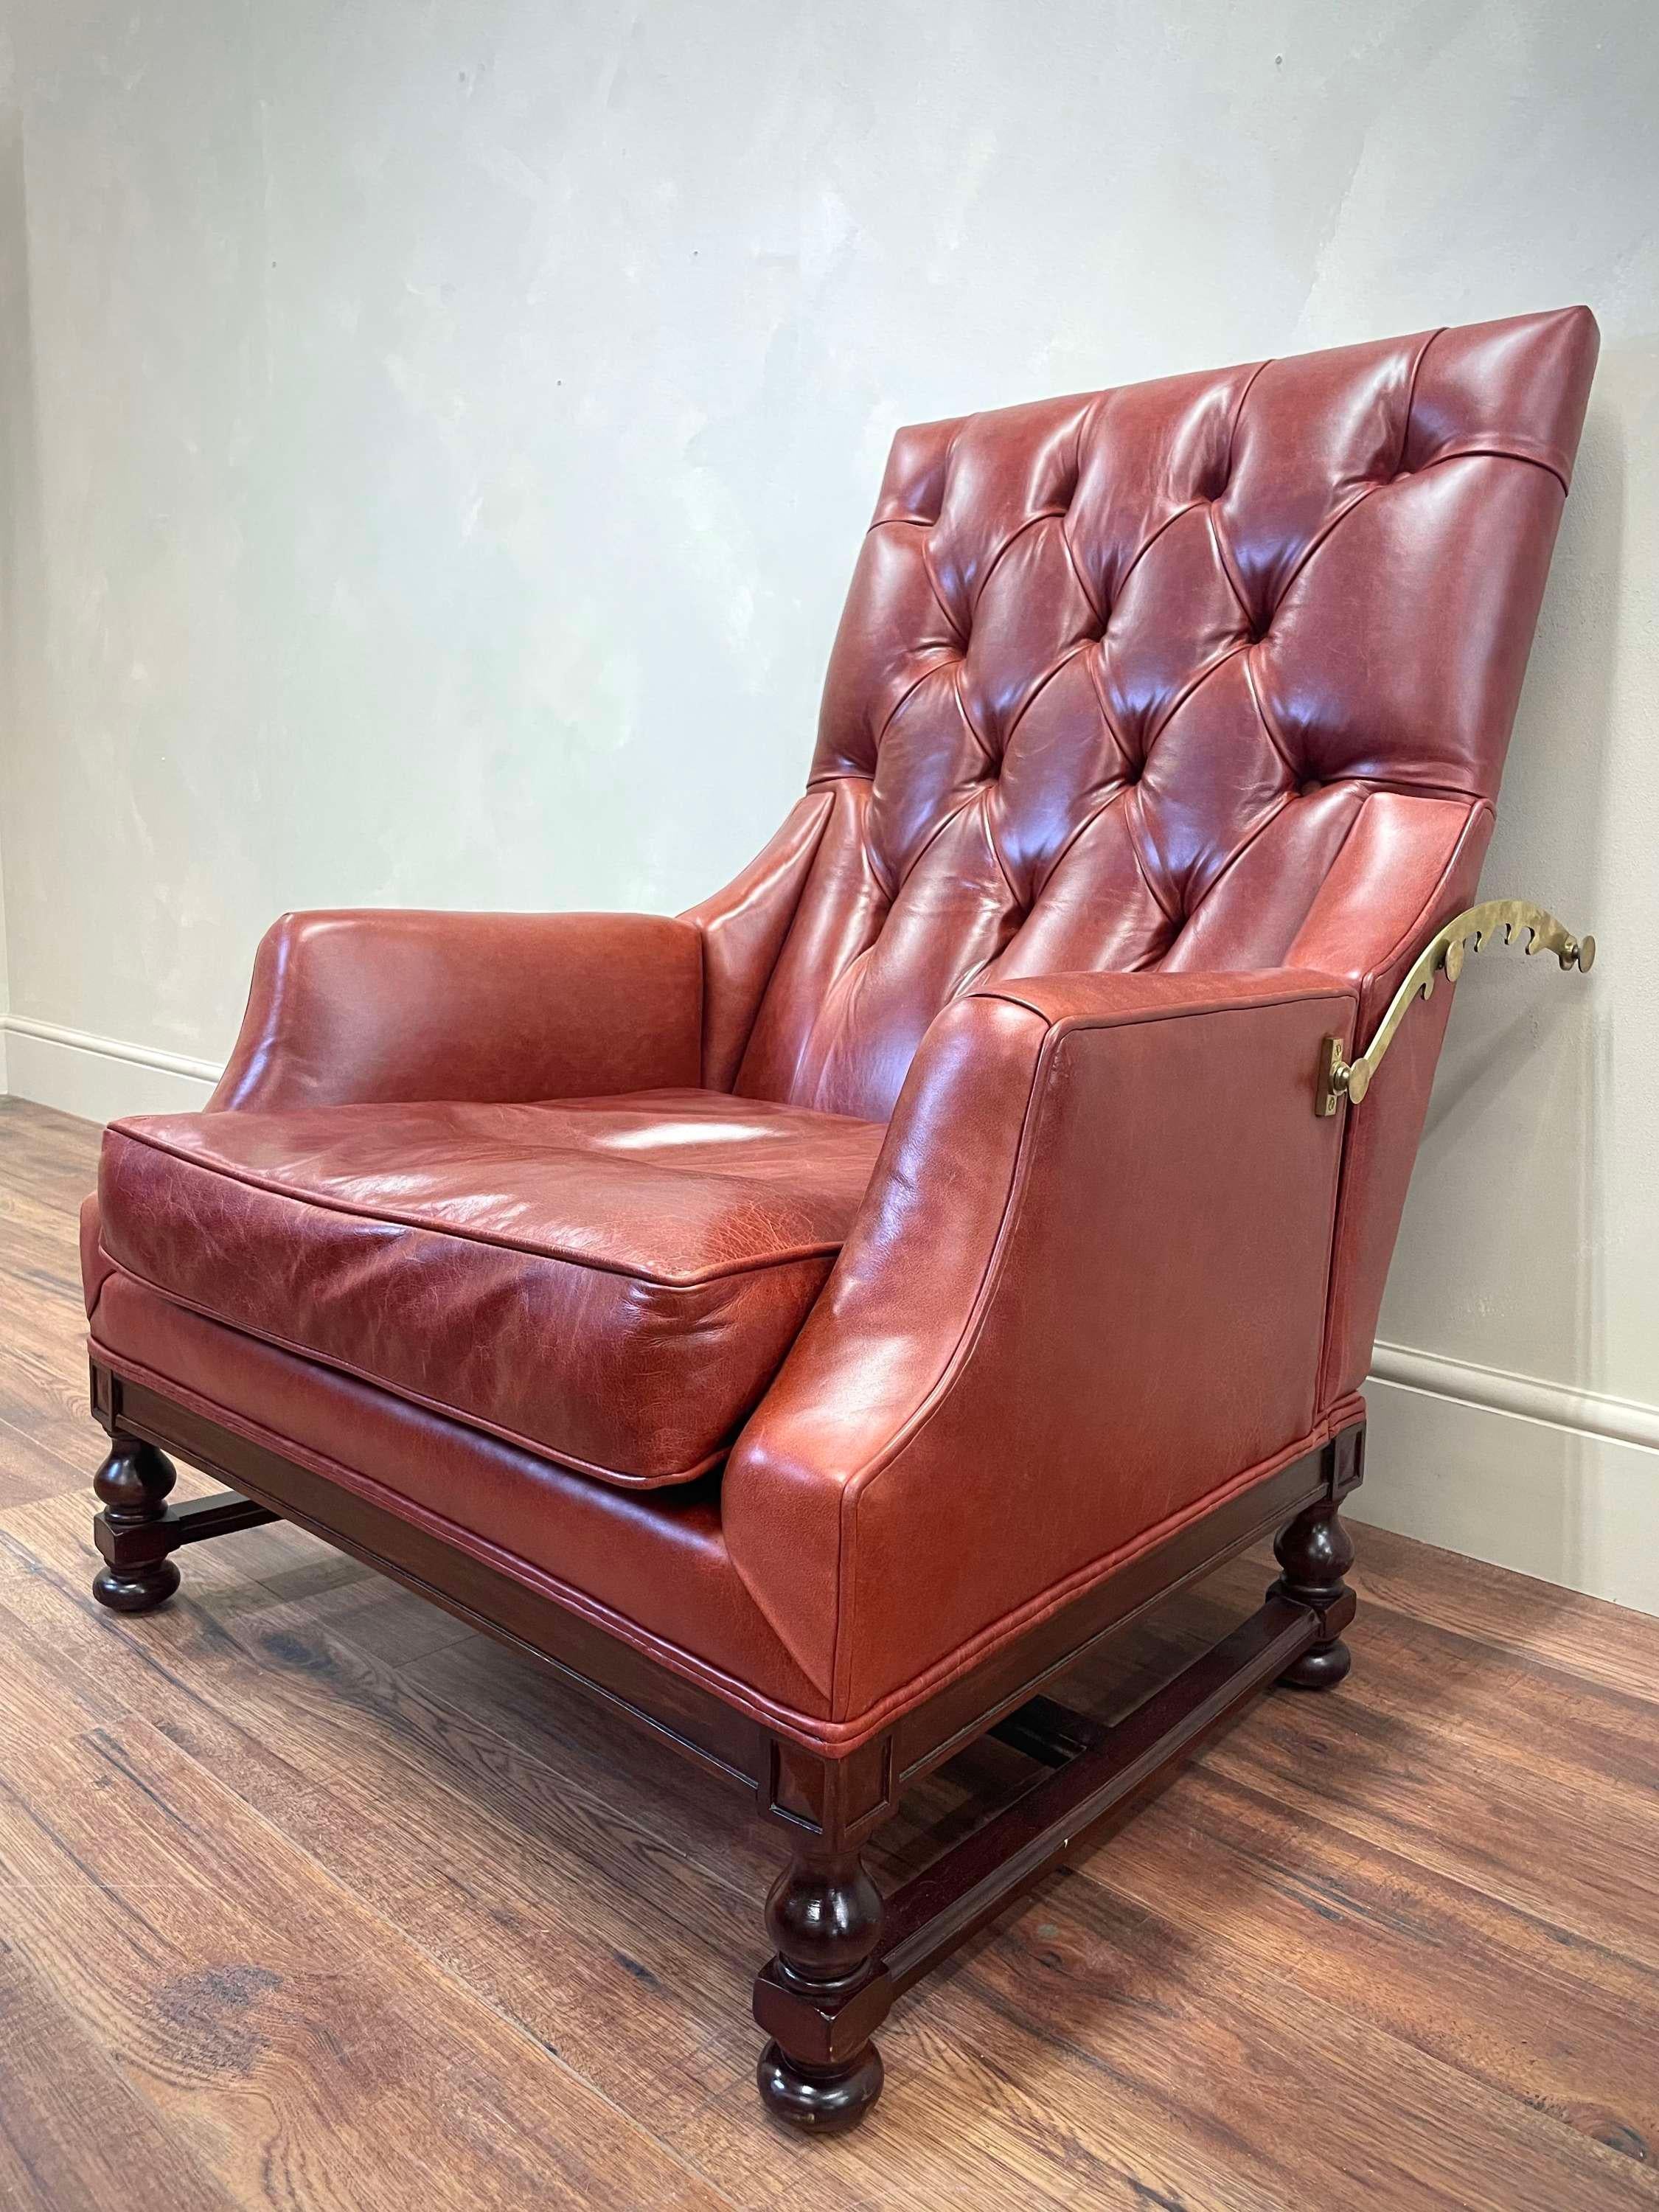 Beautiful, wide scale French 19th century reclining chair.
Upholstered traditionally in Italian Leather.
Original brass side rails allow the chair to recline into 4 positions.
Mahogany legs and stretcher restored and polished .
Feather seat